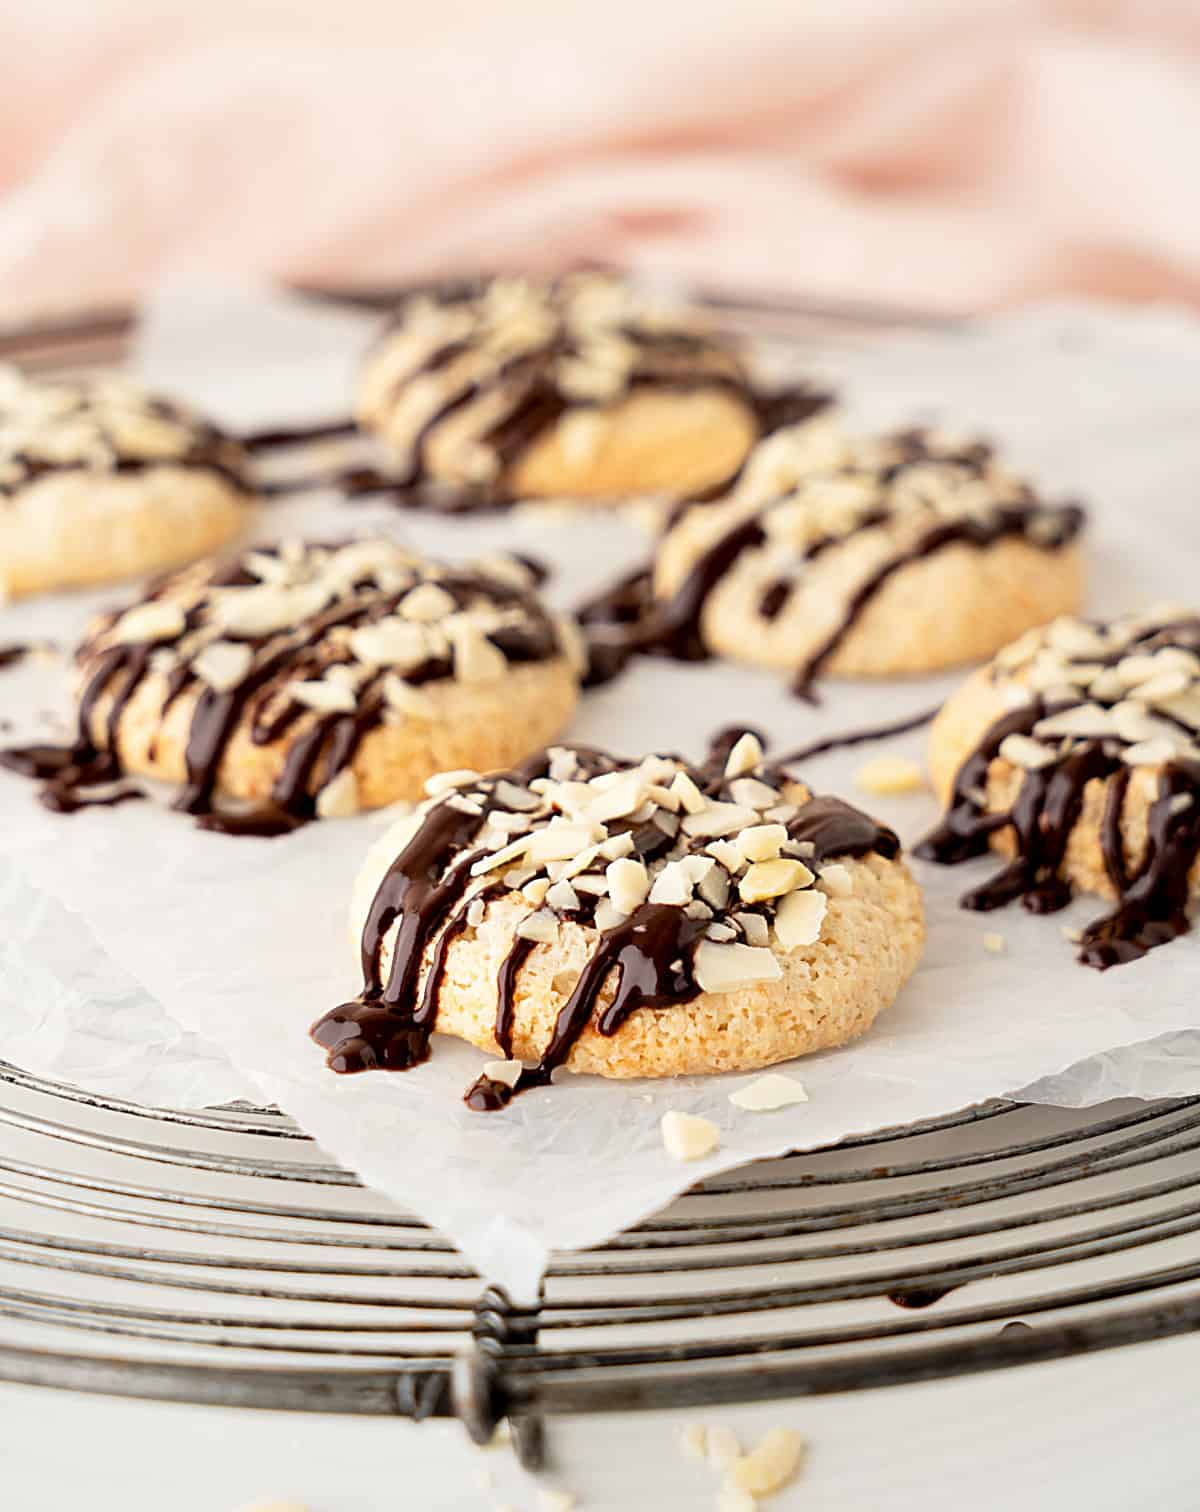 Several chocolate drizzled almond cookies on parchment paper set on a wire rack. Pink background.